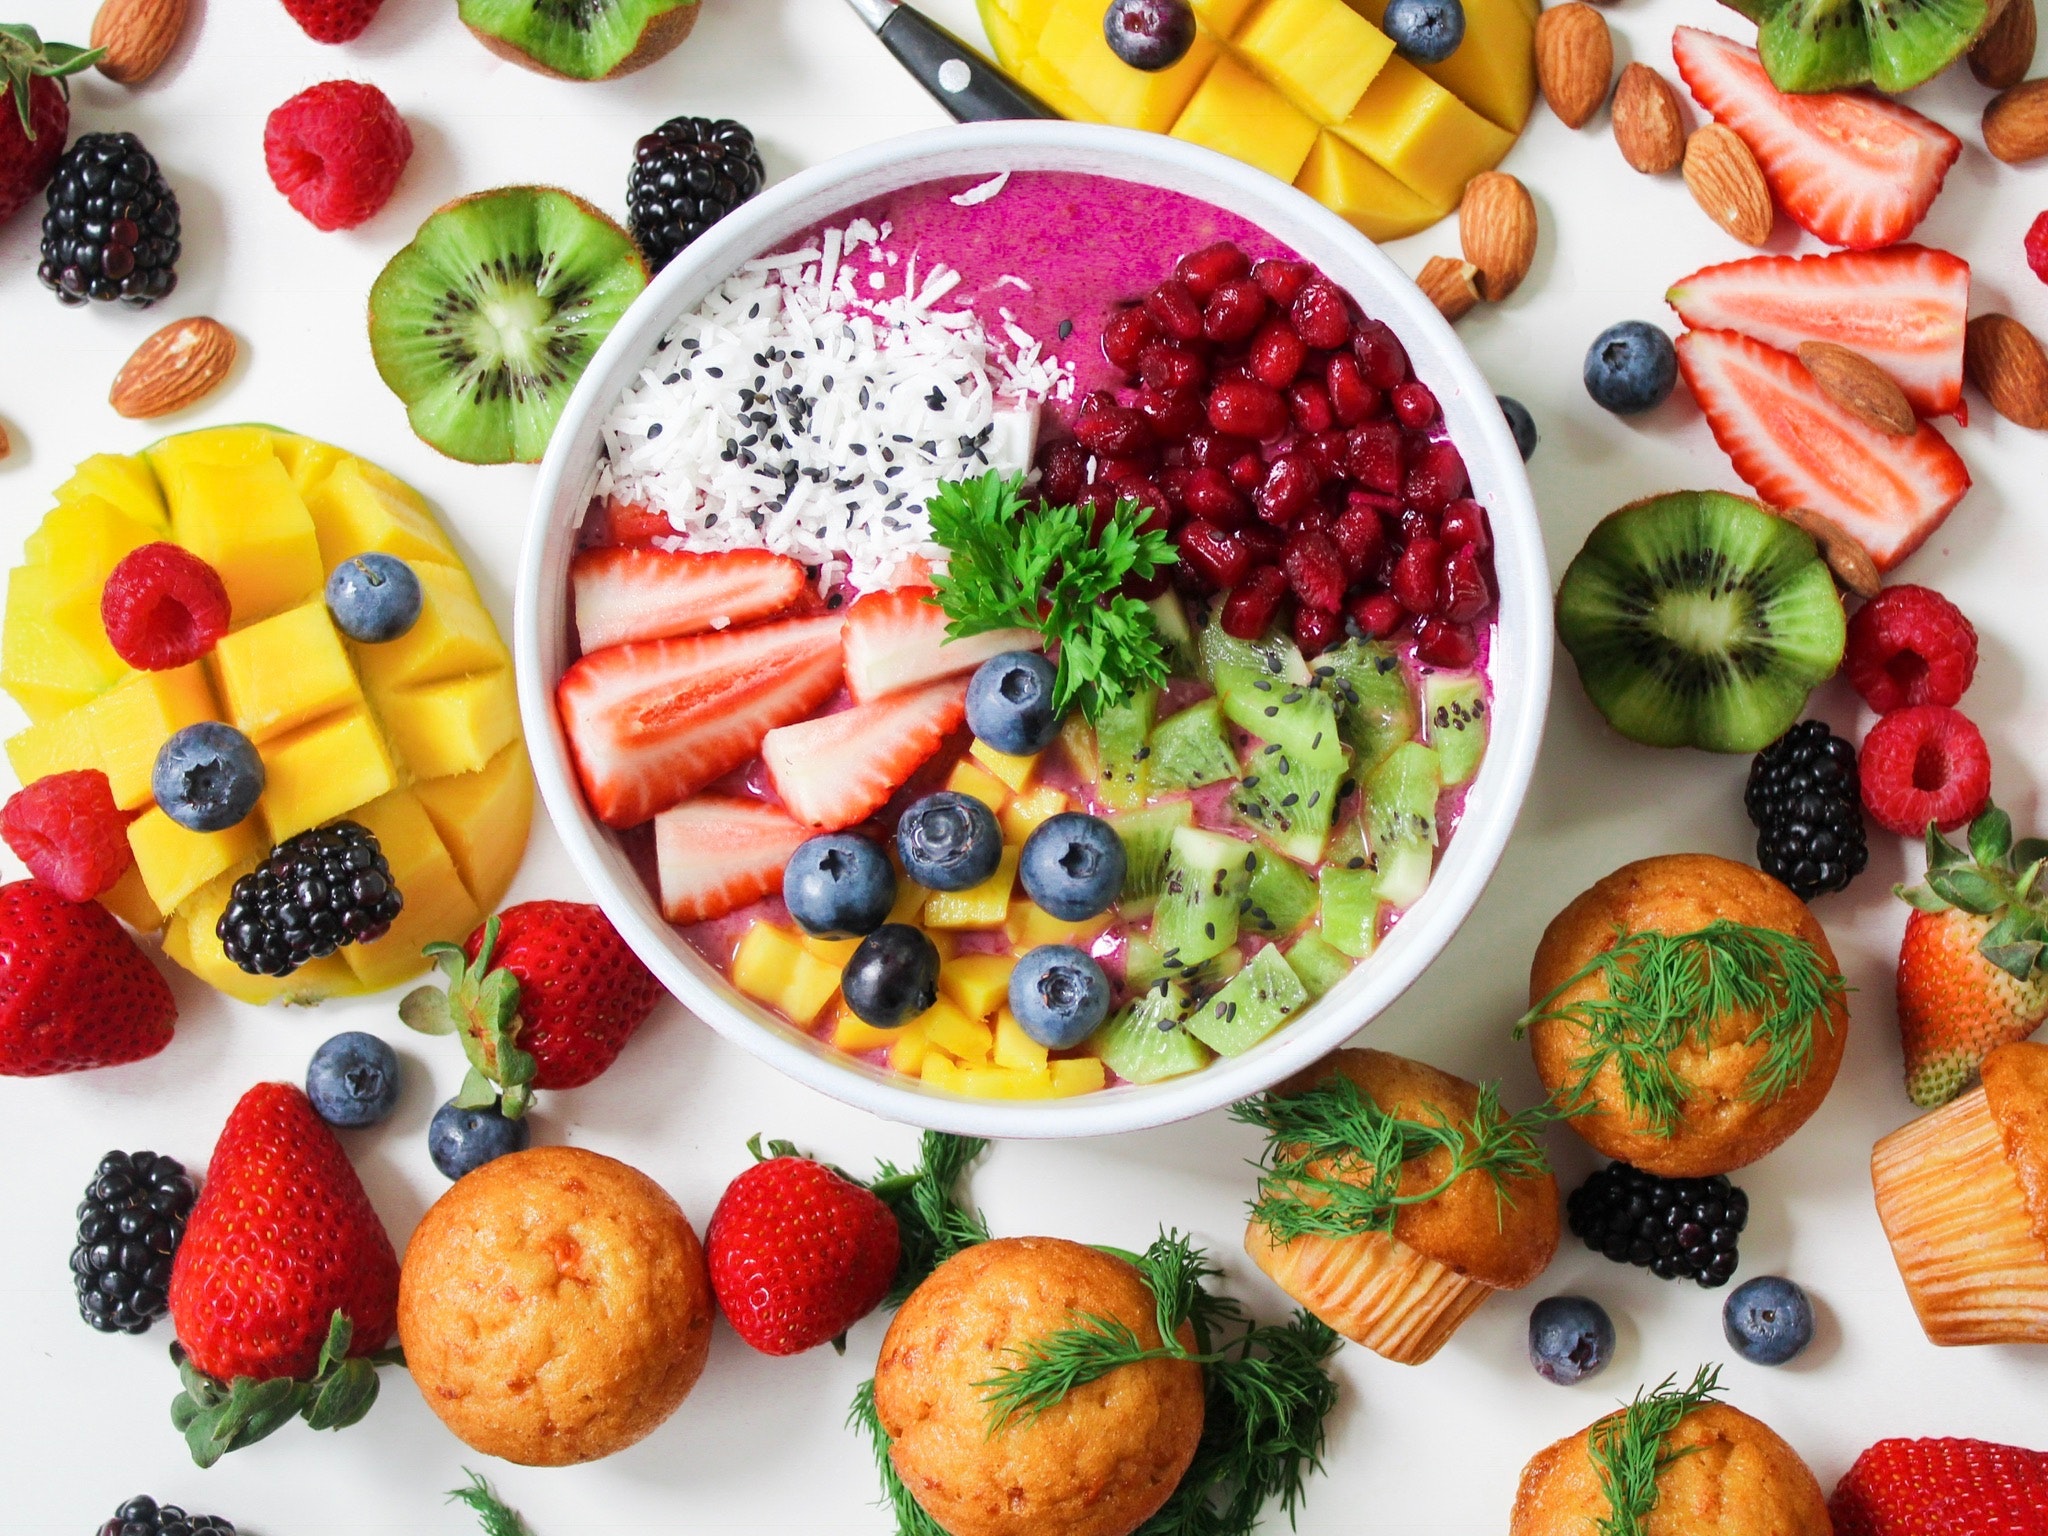 Top-down, a bowl of cut-up fruit sits on a white table, surrounded by cut fruit and several muffins